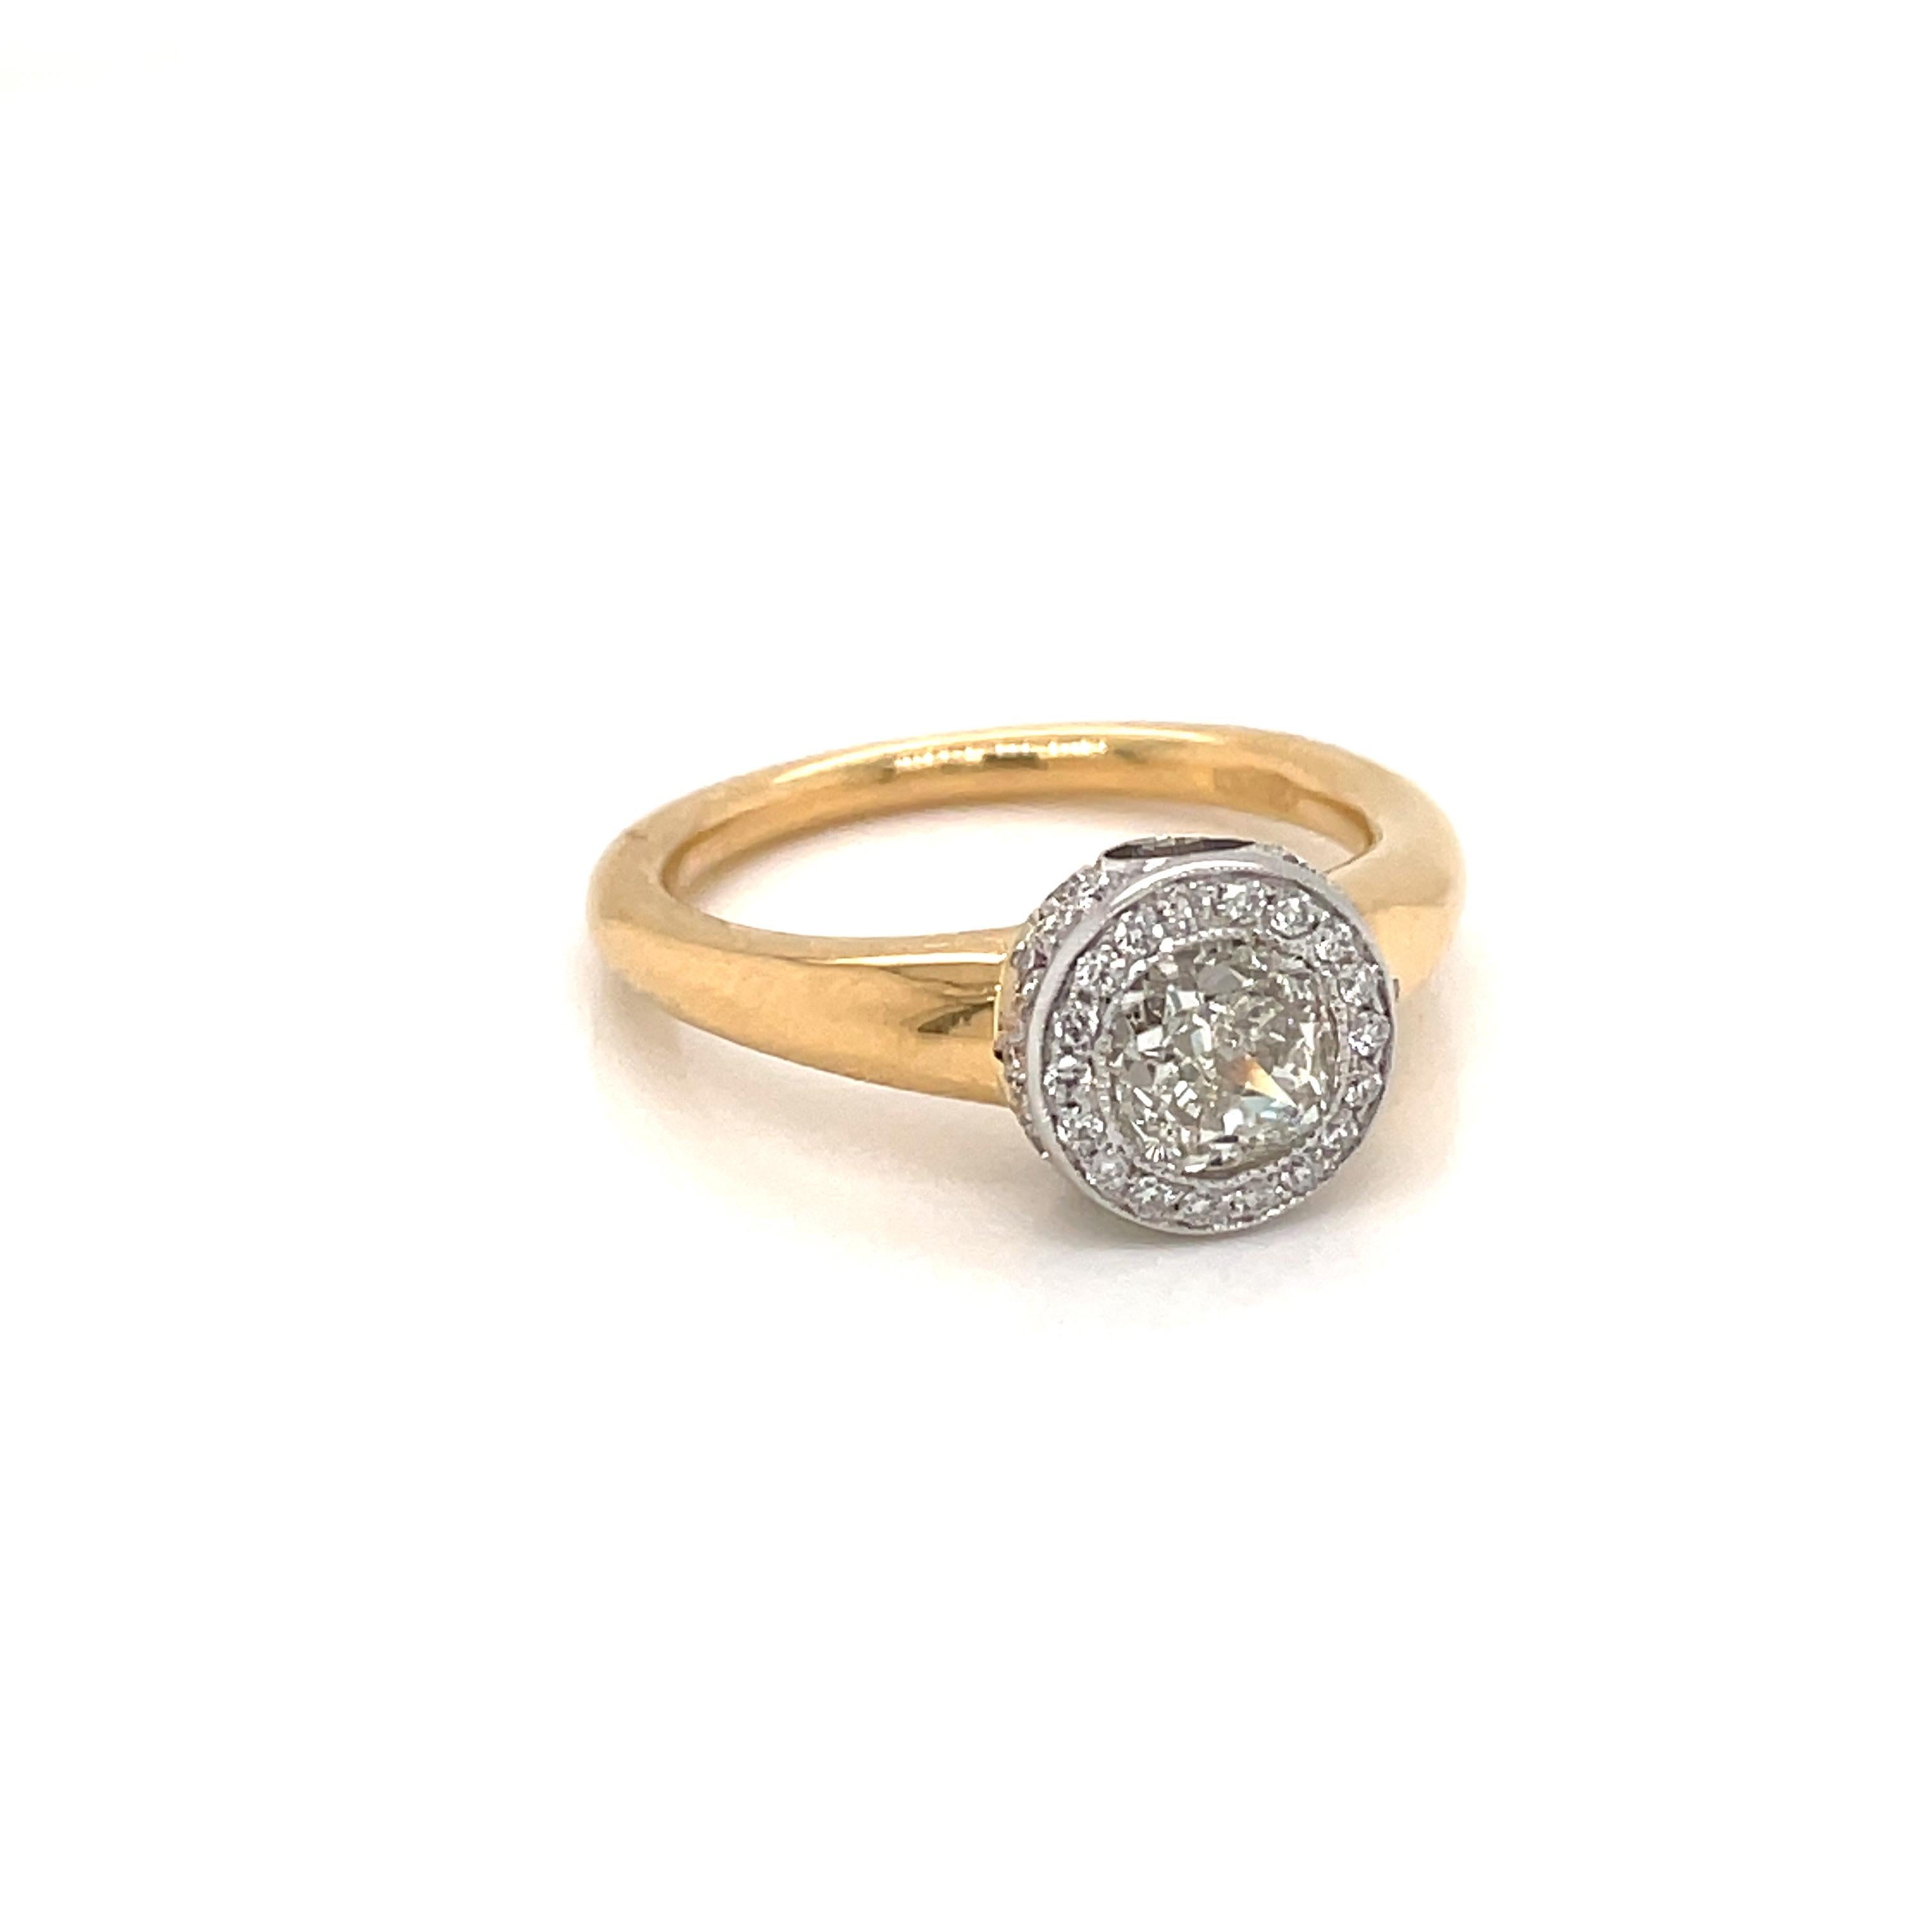 Set with a 1.02 ct. Cushion diamond in a brilliant white and yellow 18 k gold setting, it has a timeless yet modern aesthetic. Designed to be layered and mixed for an effortless look.

The Diamond is graded I color Vs1. it is accompanied by an IGI